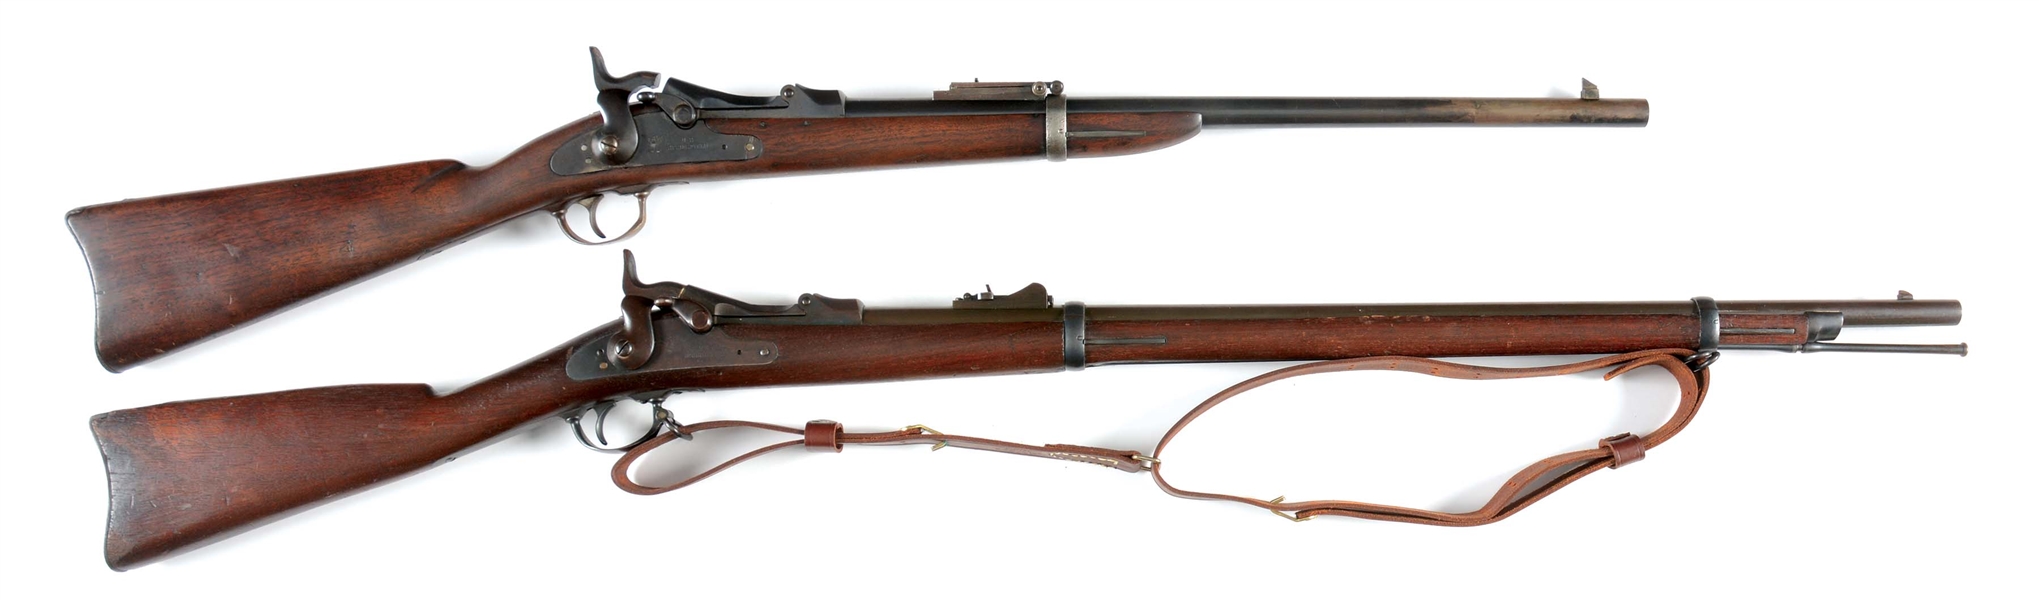 (A) LOT OF TWO: SPRINGFIELD TRAPDOOR .45-70 RIFLE AND CARBINE.